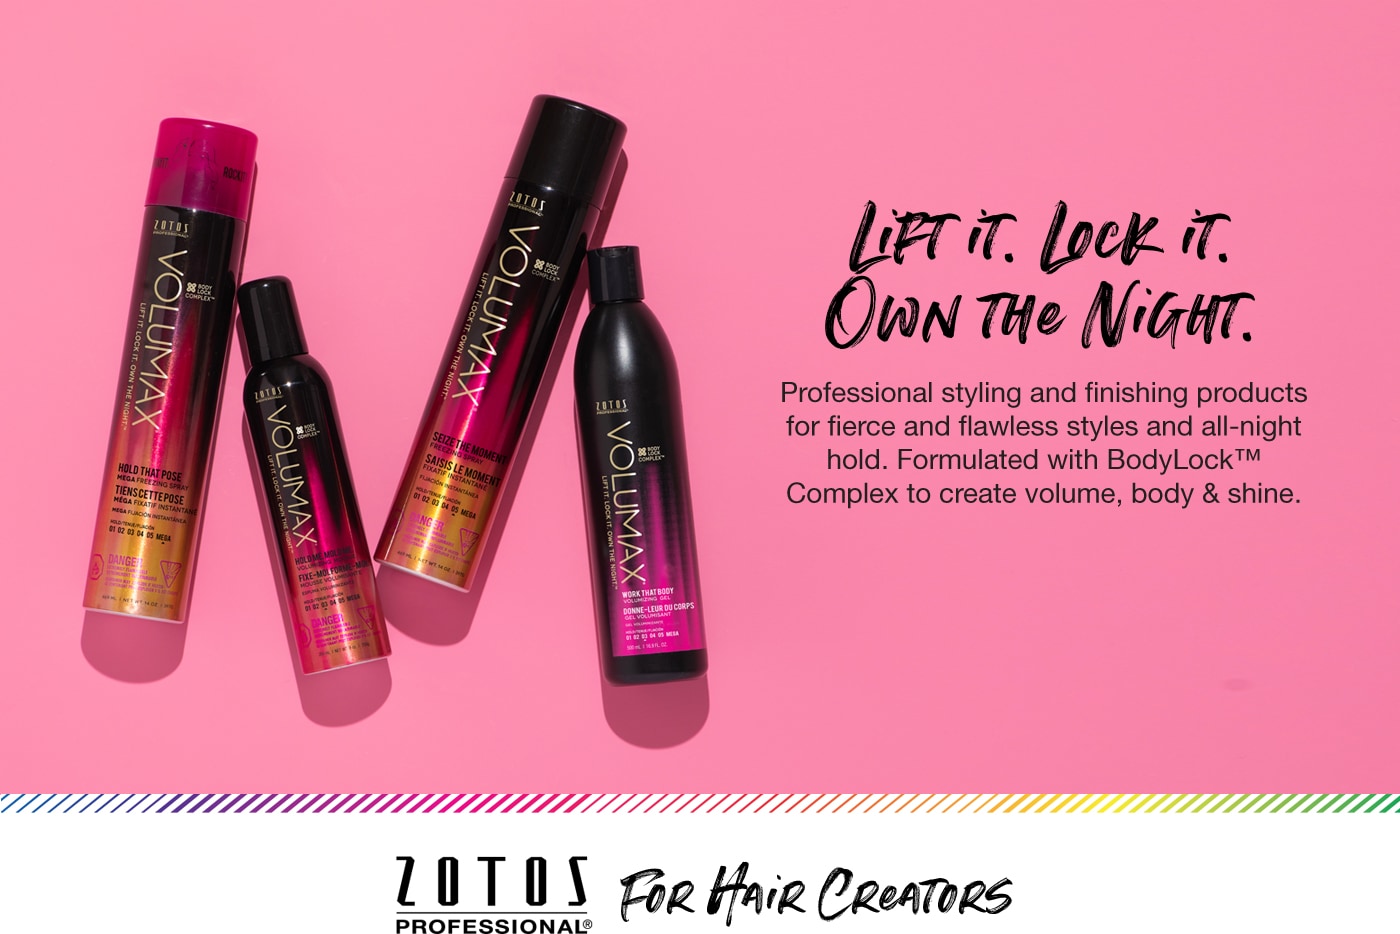 Zotos Volumax offers professional styling and finishing products for fierce and flawless styles and all-night hold. Formulate with BodyLock Complex to create volume, body, and shine.